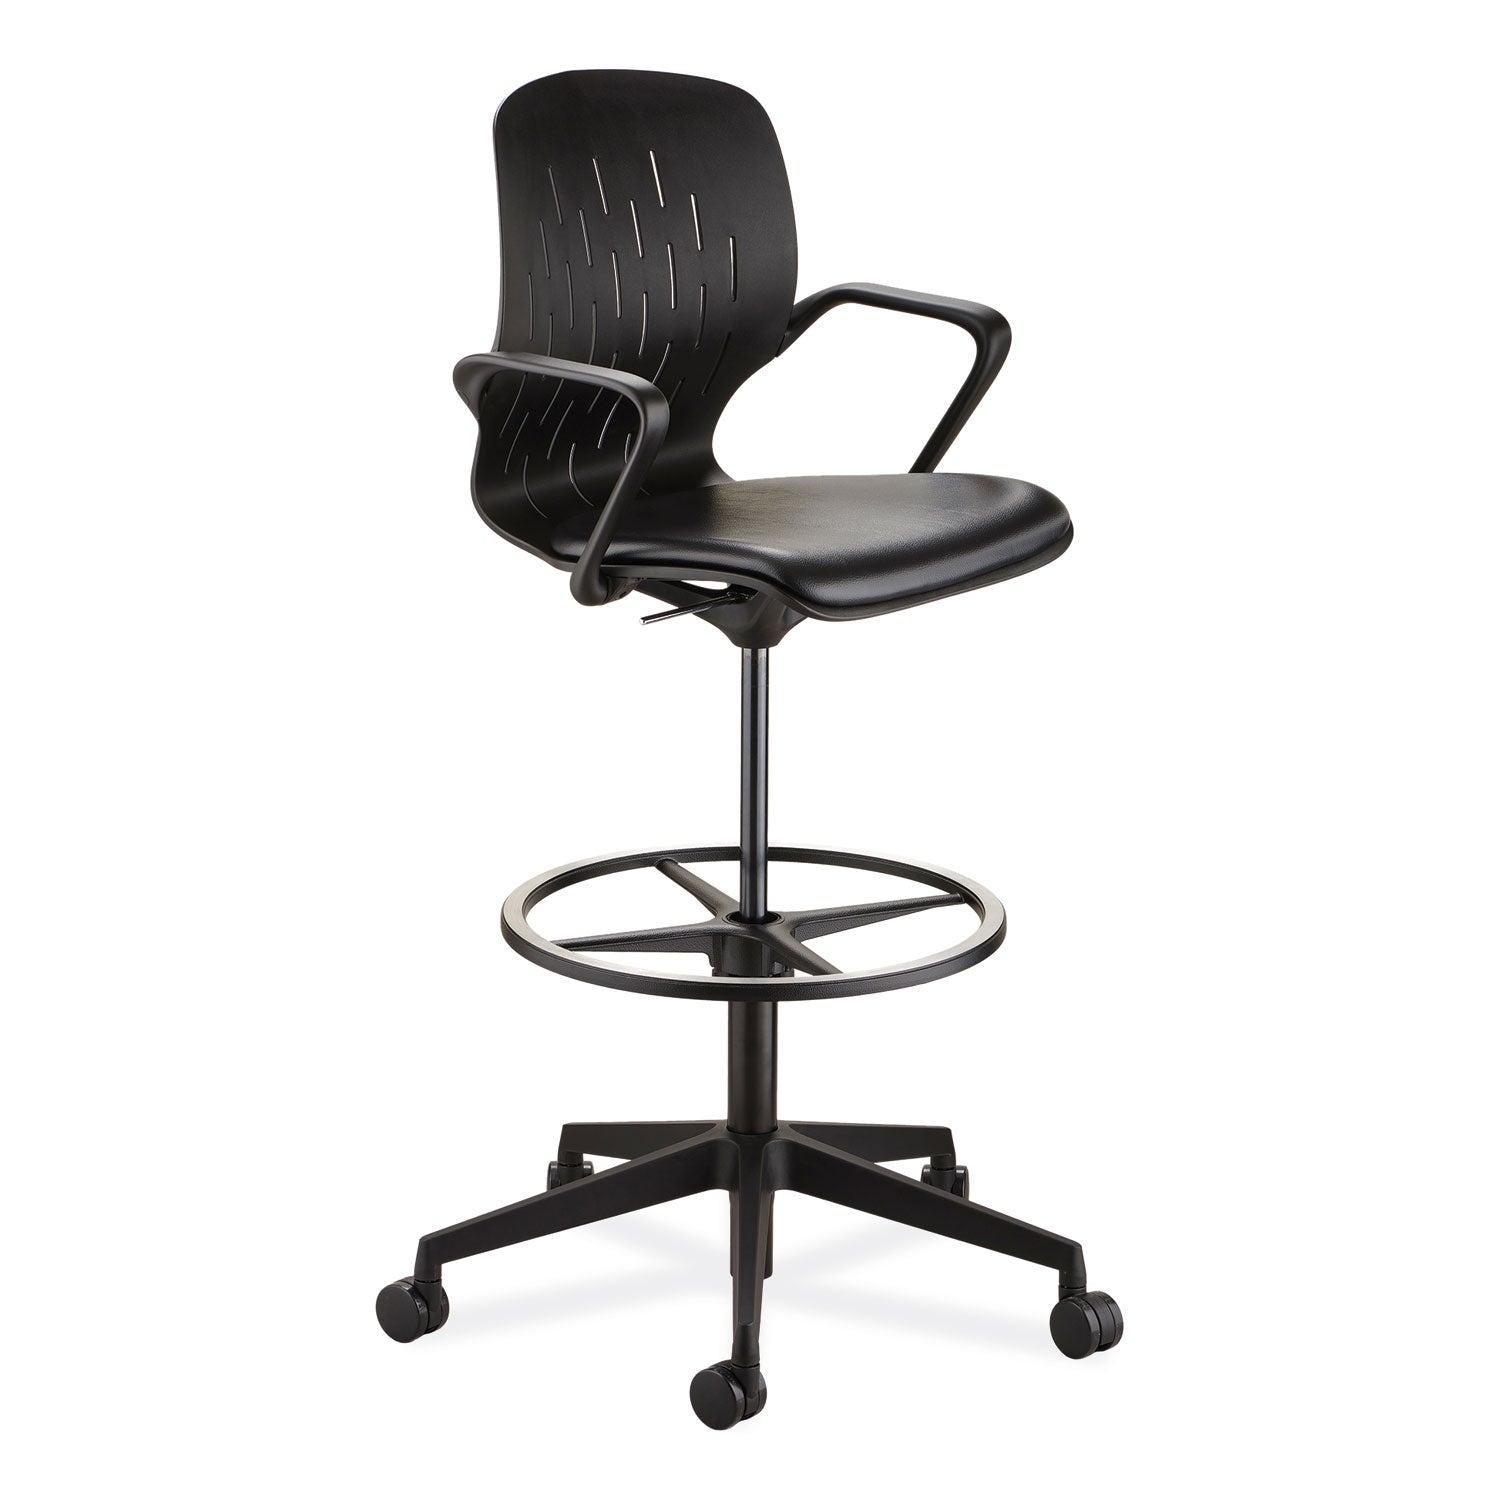 shell-extended-height-chair-supports-up-to-275-lb-22-to-32-high-black-seat-black-back-base-ships-in-1-3-business-days_saf7014bl - 1